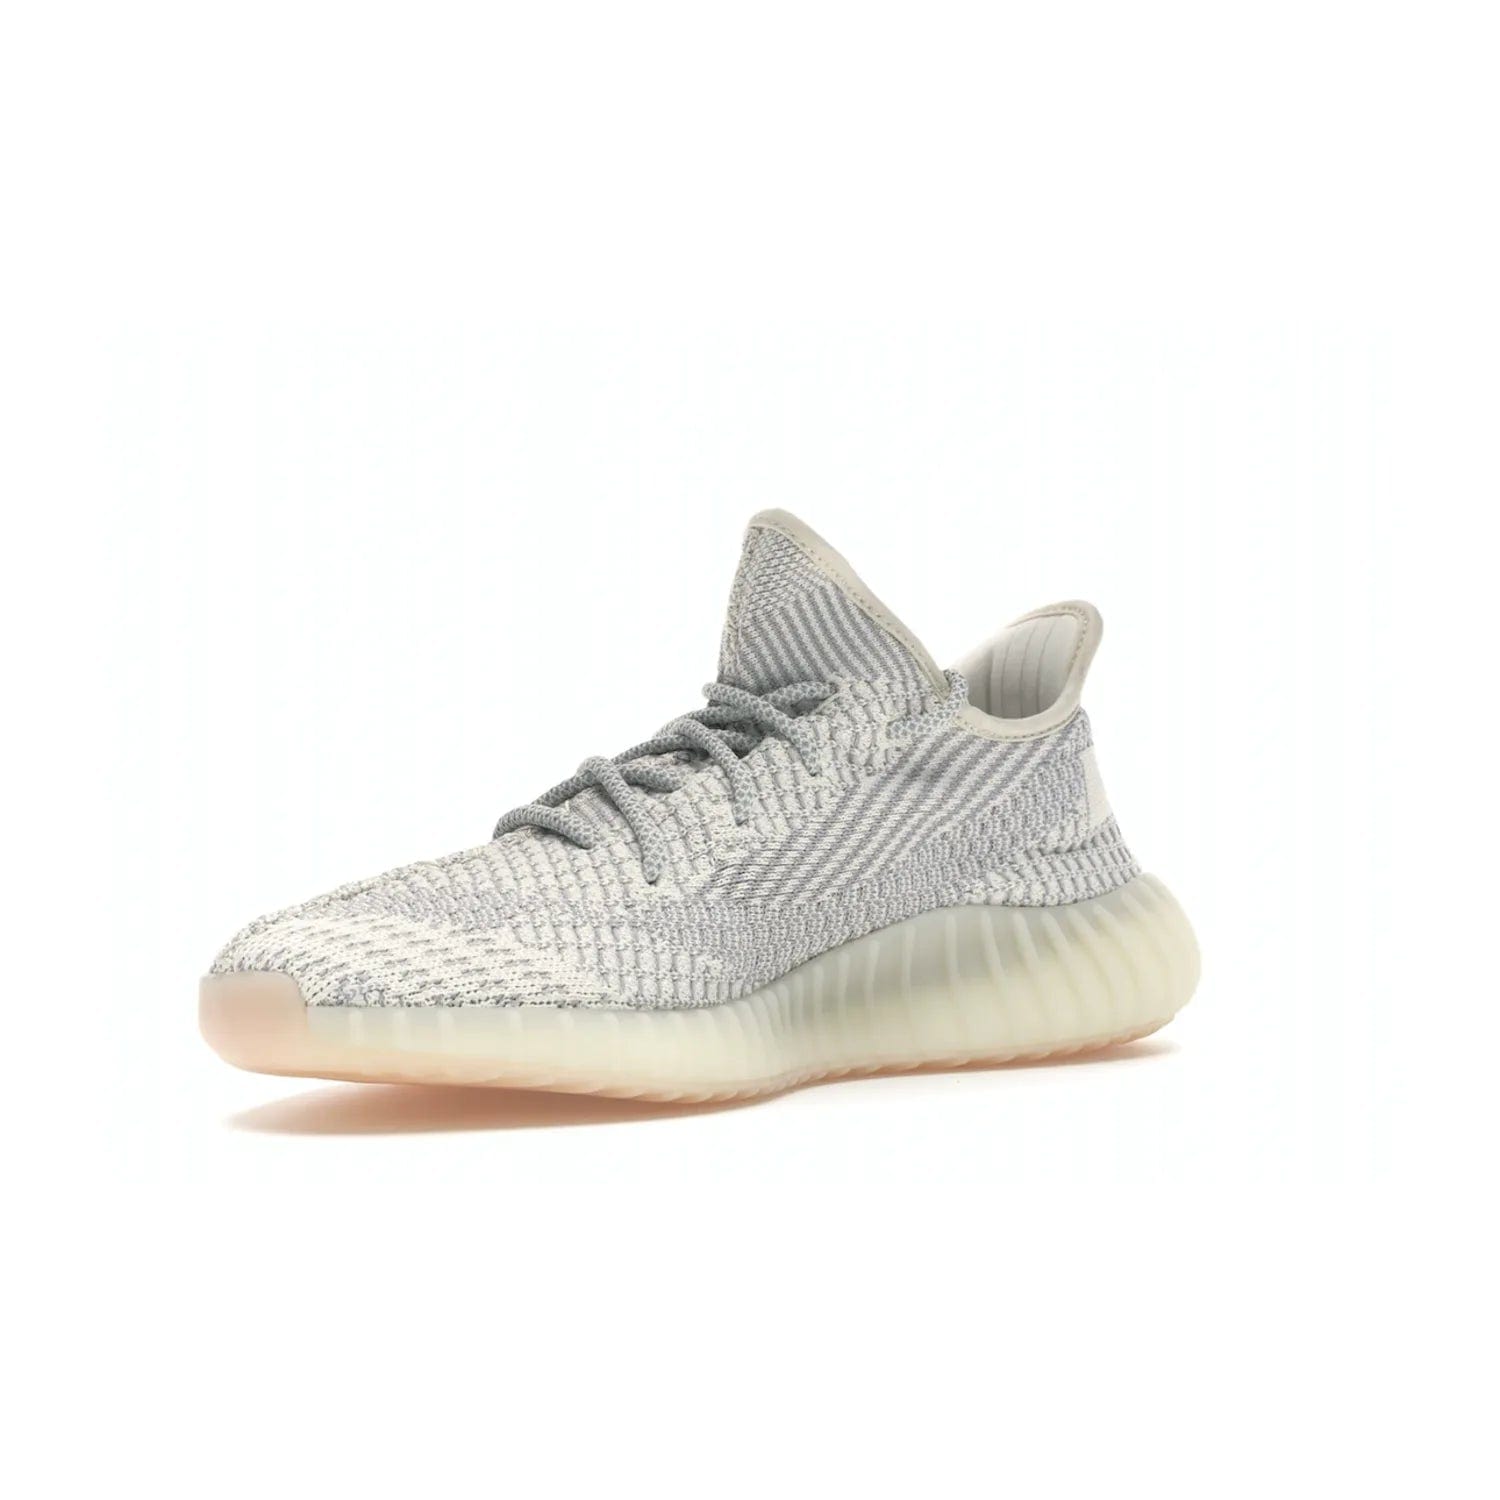 adidas Yeezy Boost 350 V2 Lundmark (Non Reflective) - Image 15 - Only at www.BallersClubKickz.com - Shop the exclusive adidas Yeezy Boost 350 V2 Lundmark with a subtle summer color, mesh upper, white-to-cream transitional midsole, light tan outsole, and pink middle stripe. Comfort and style come together in this perfect summer 350 V2. Released on July 11, 2019.